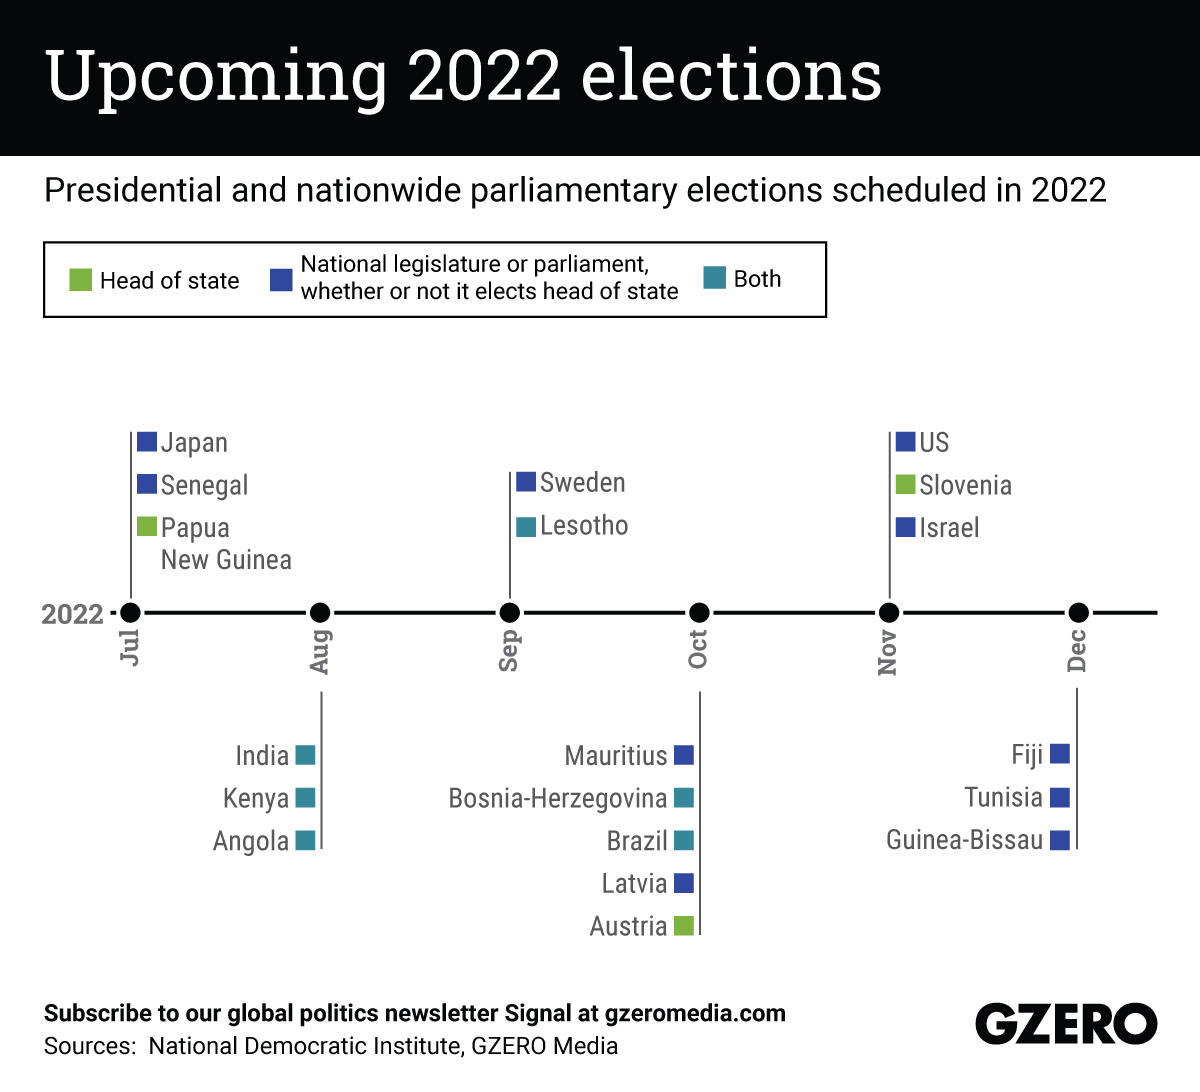 The Graphic Truth: Upcoming 2022 elections